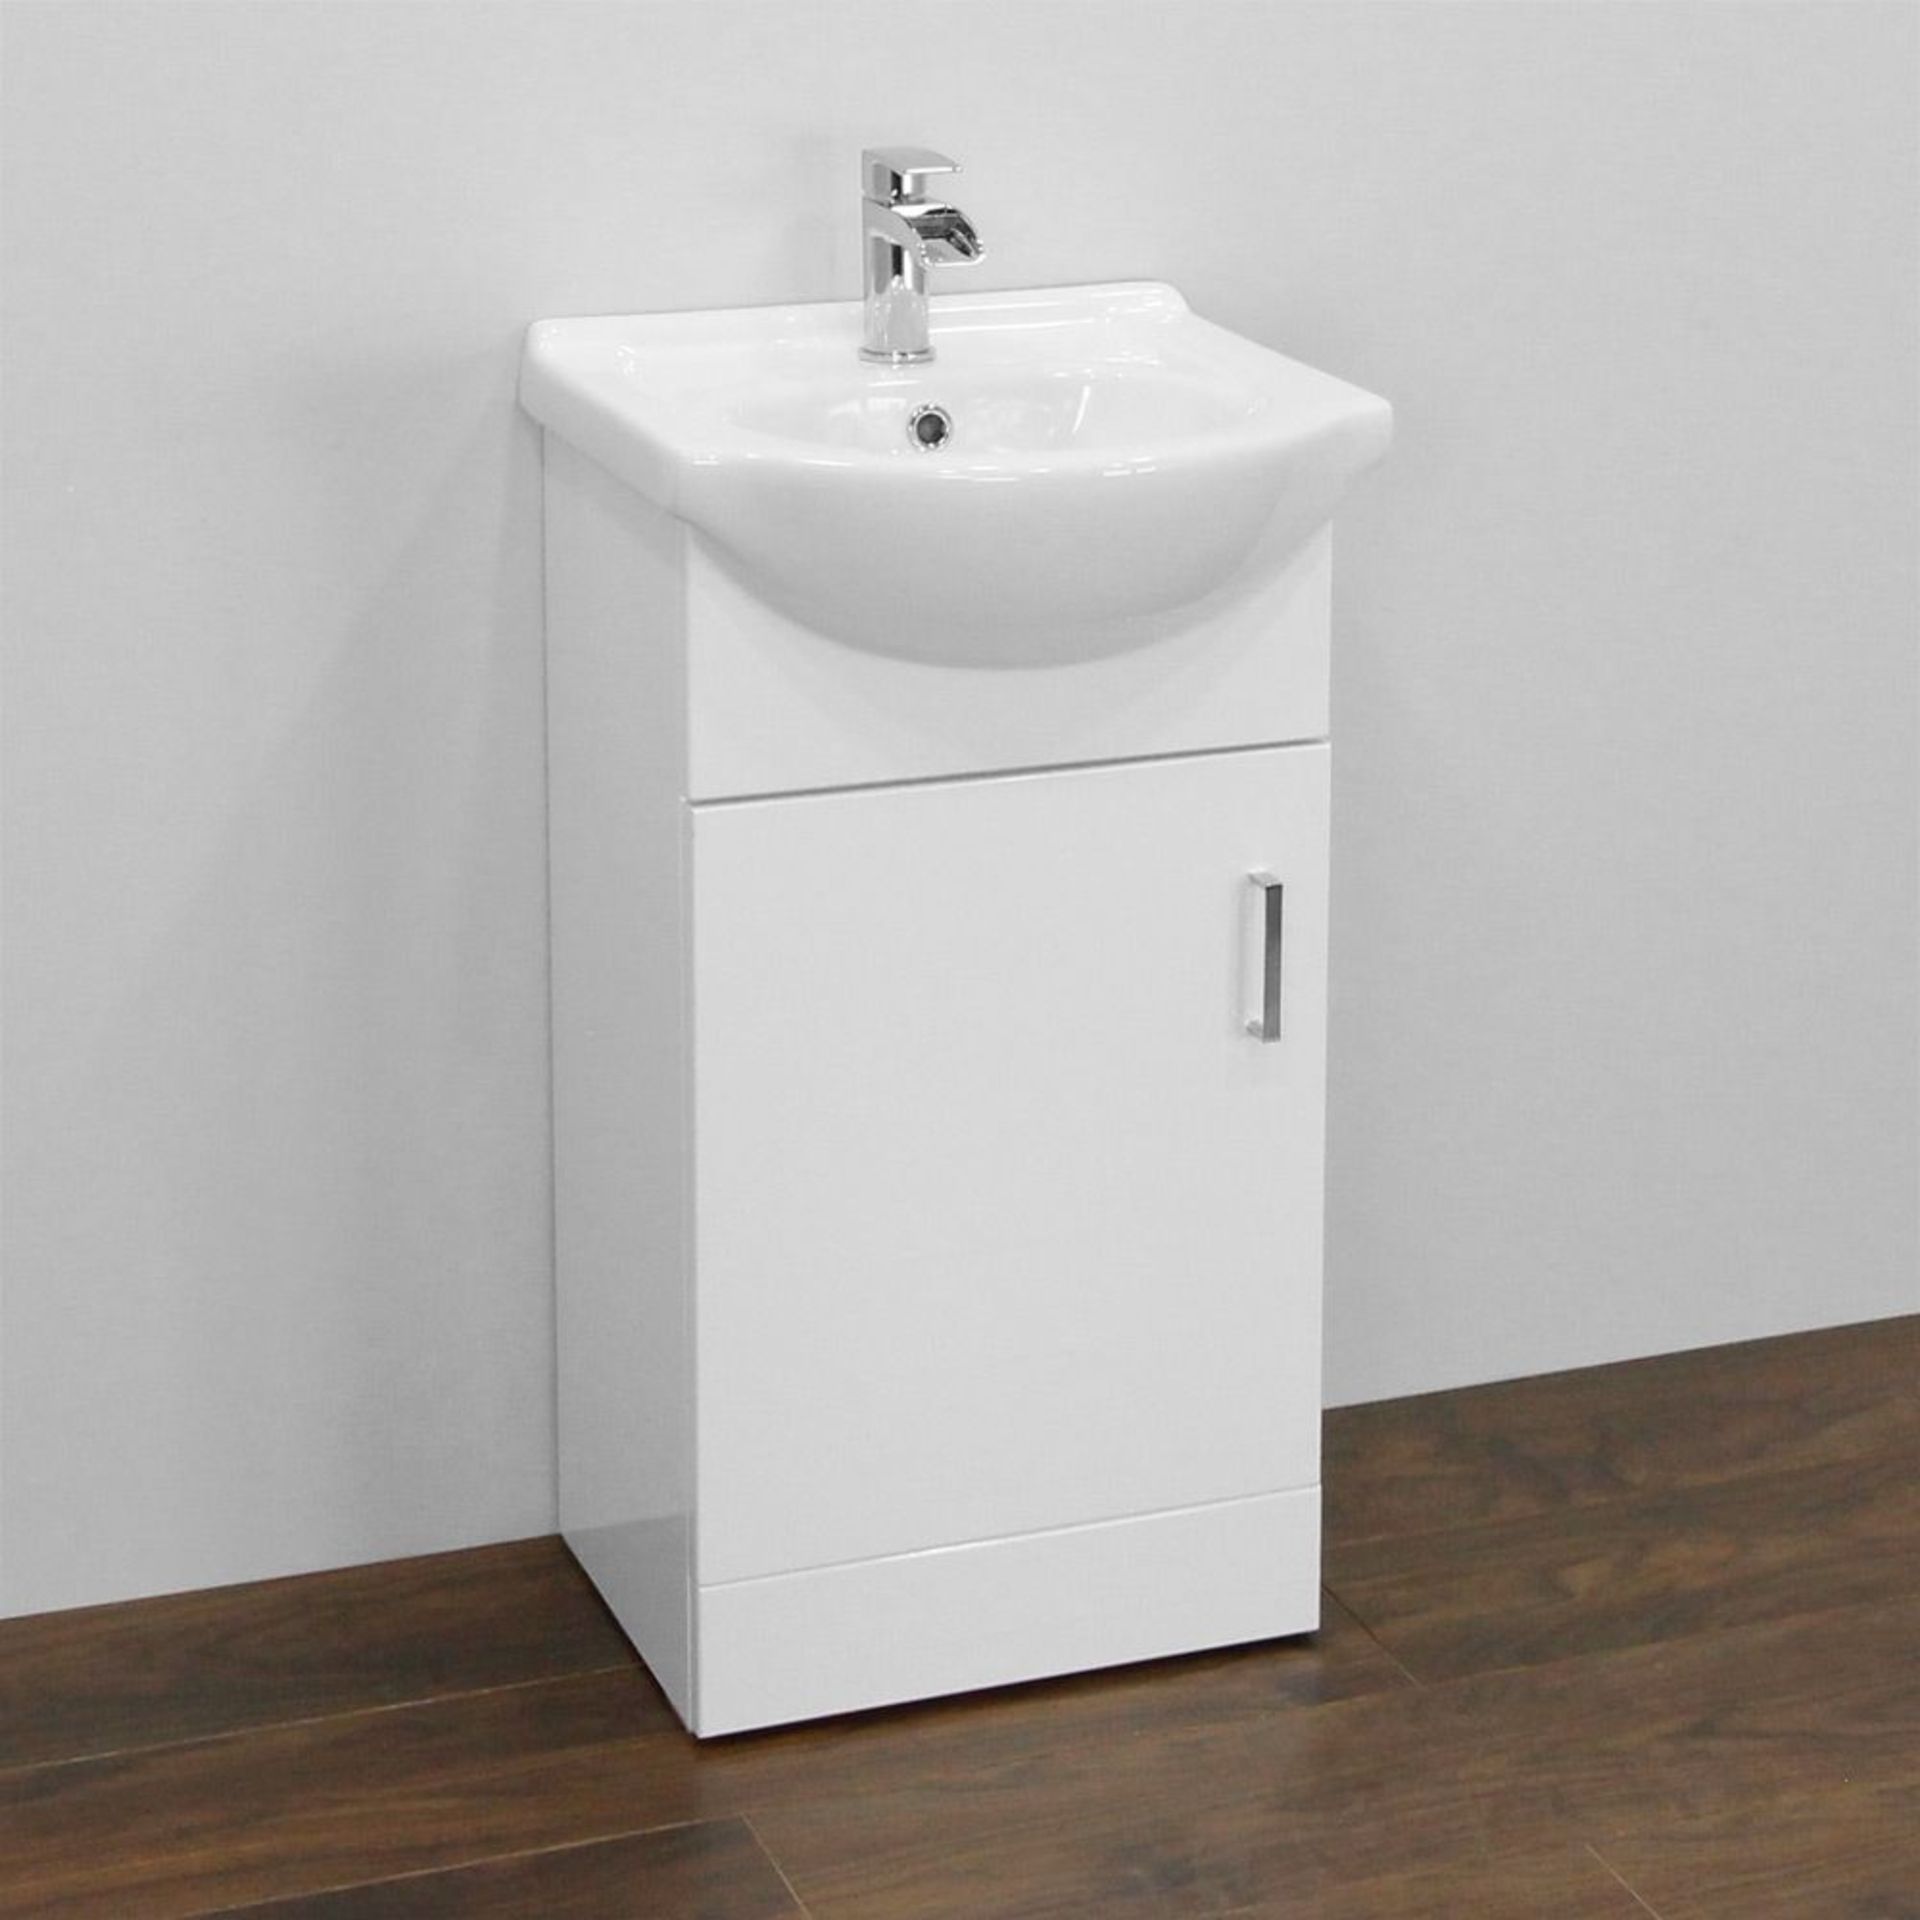 New (T61) Vista 450mm Cabinet White Gloss. RRP £327.99. The Vista 450mm Cabinetis A Great Buy...